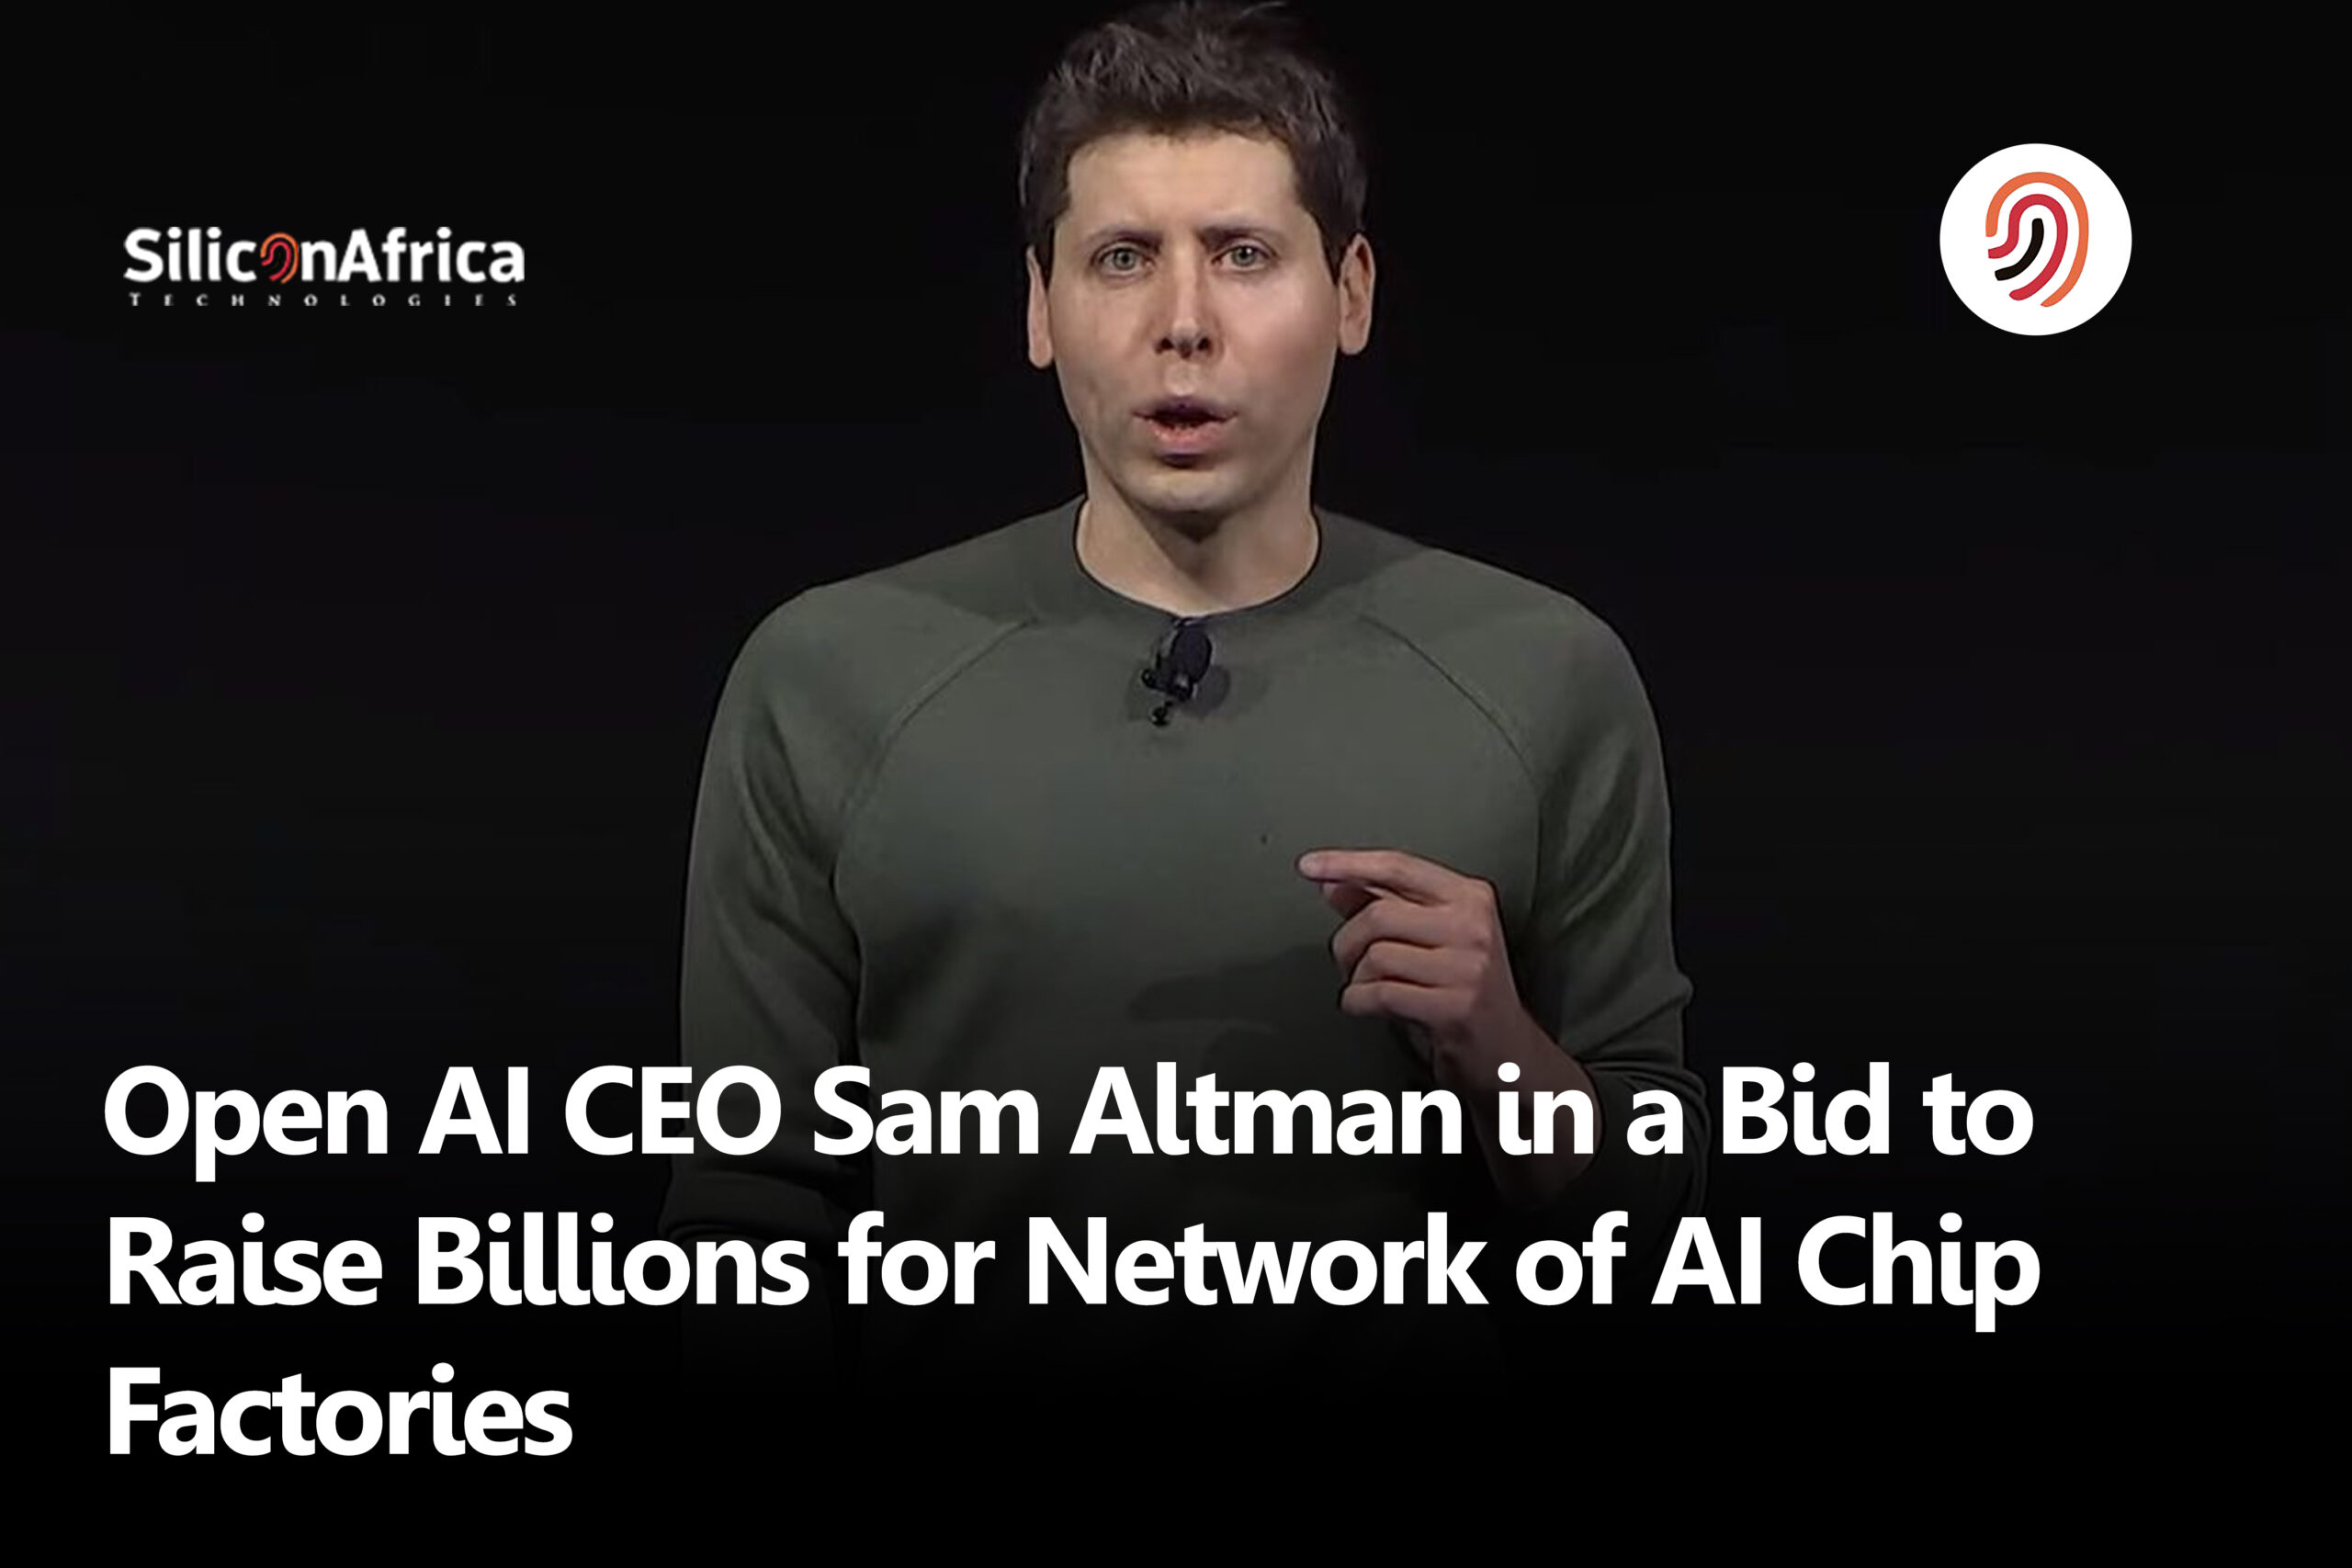 Open AI CEO Sam Altman in a Bid to Raise Billions for Network of AI Chip Factories